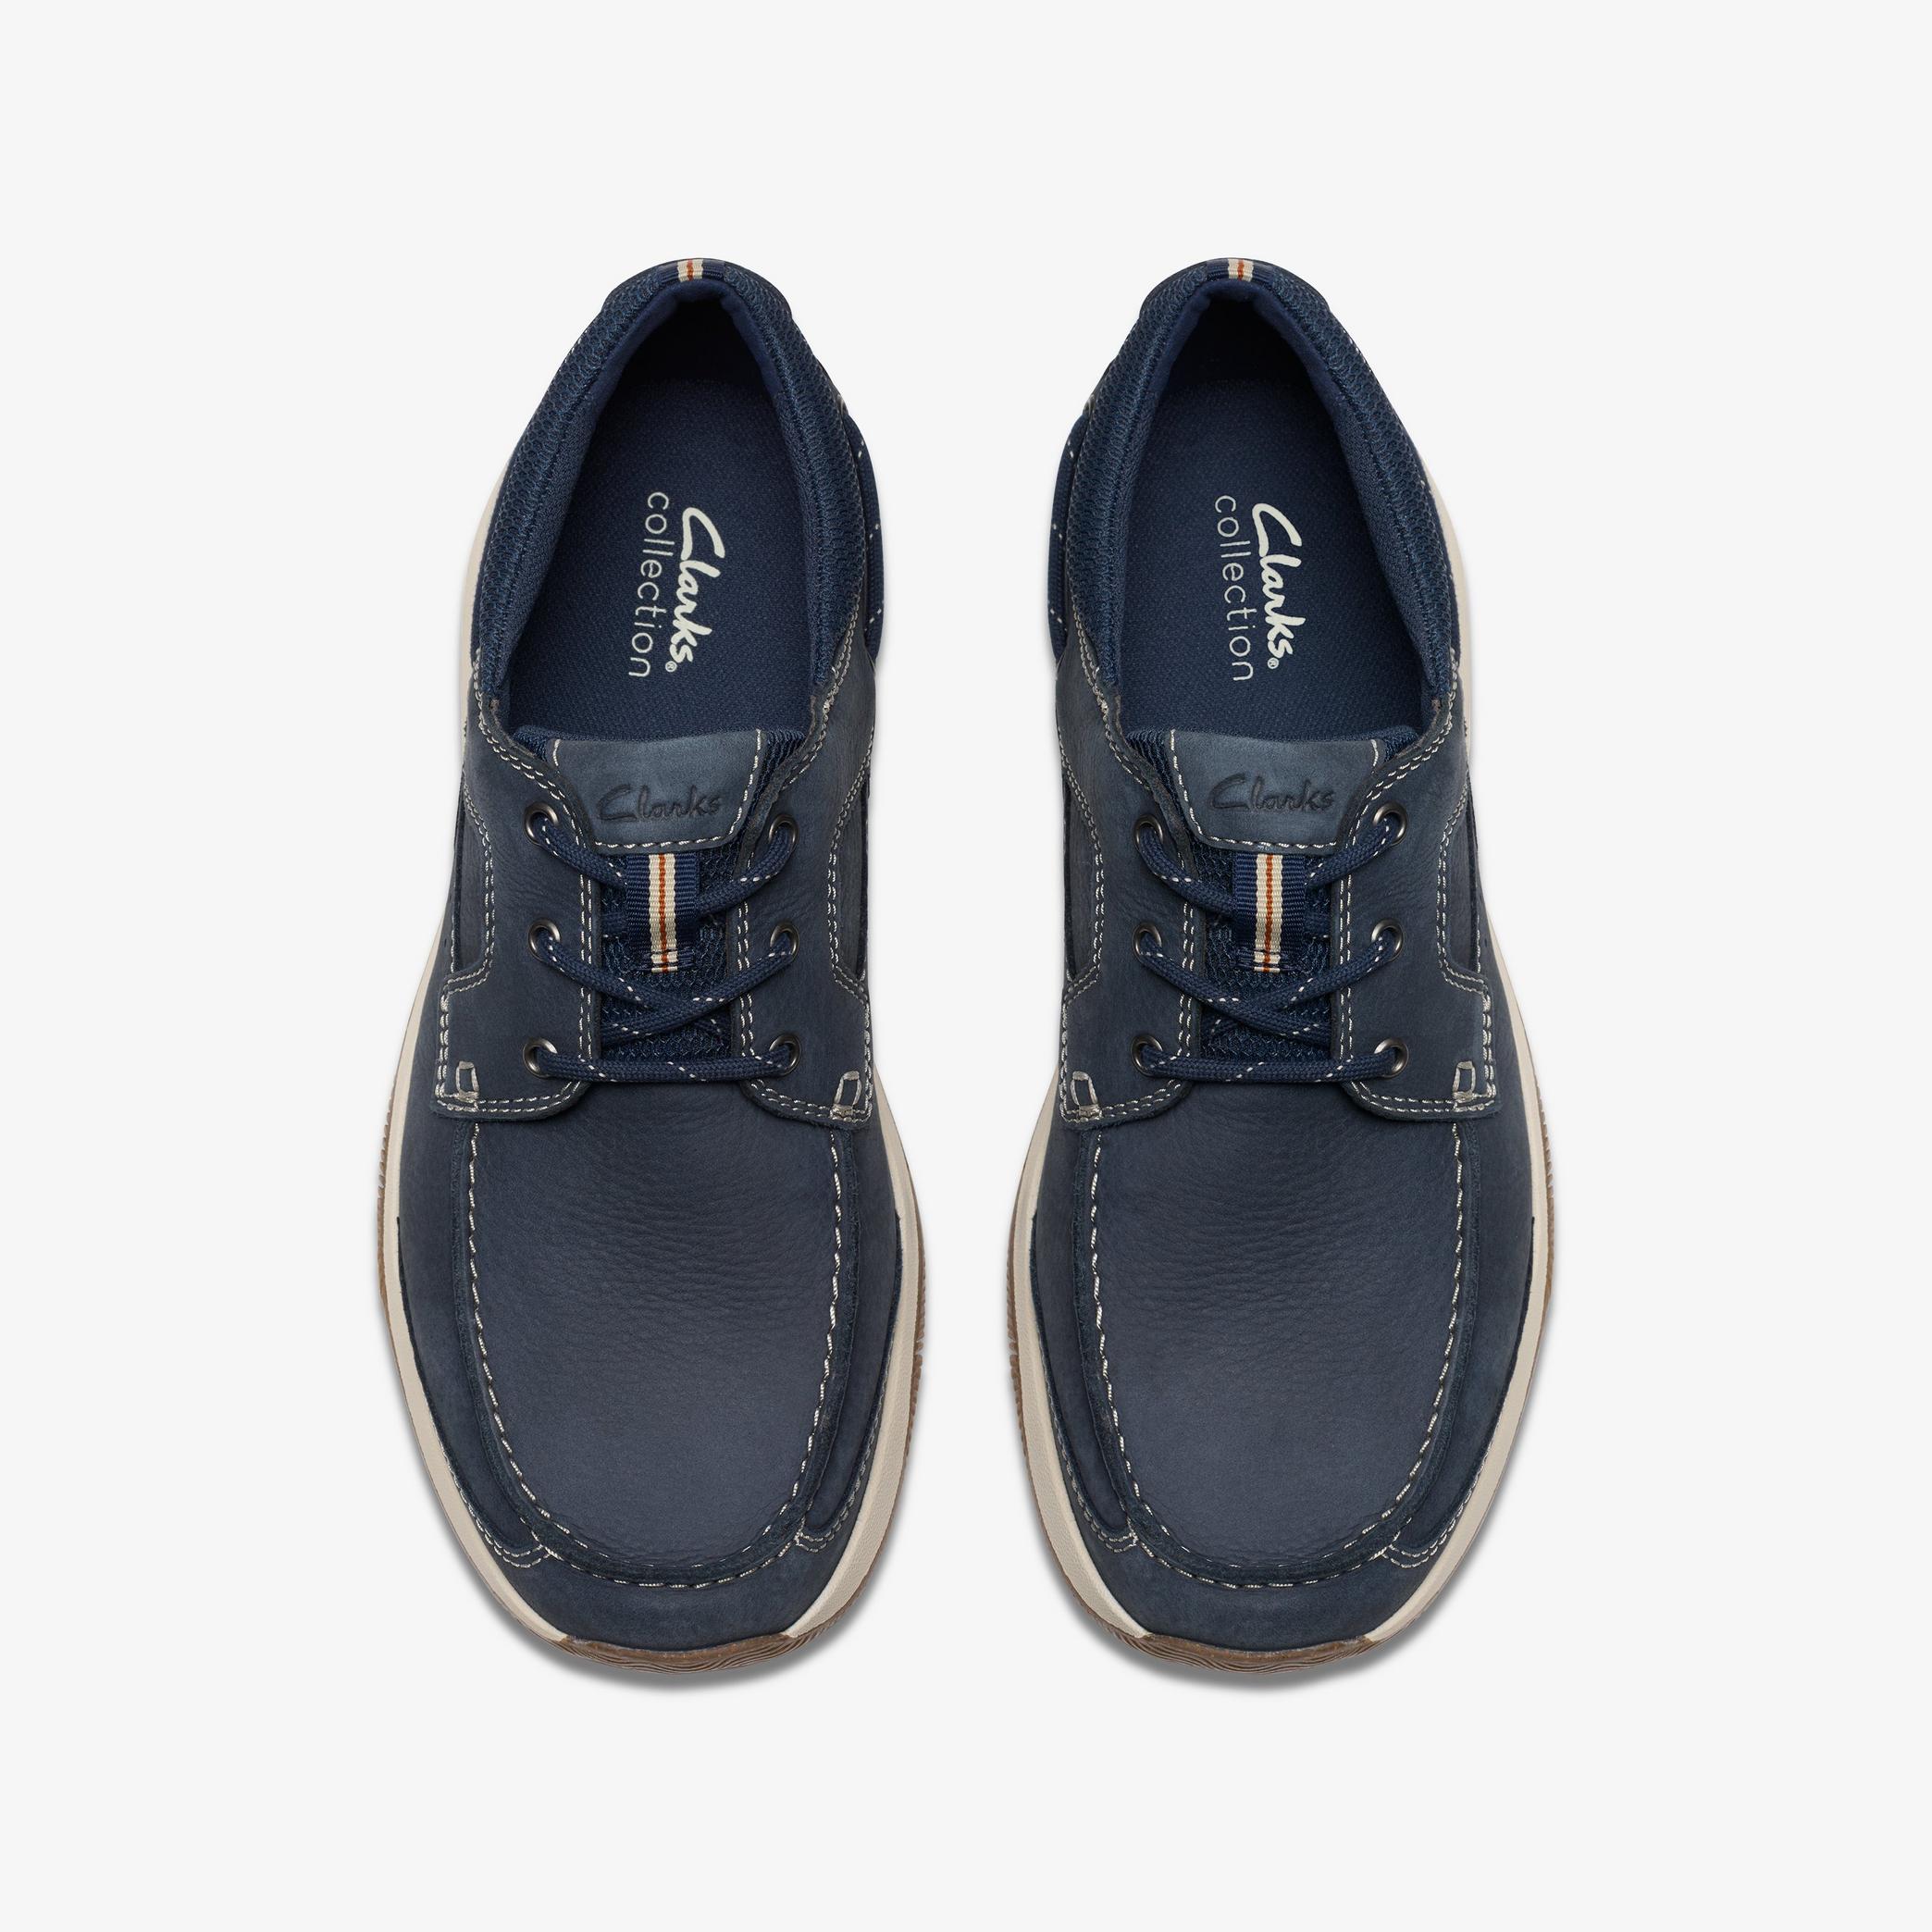 Sailview Lace Navy Nubuck Boat Shoes, view 6 of 6